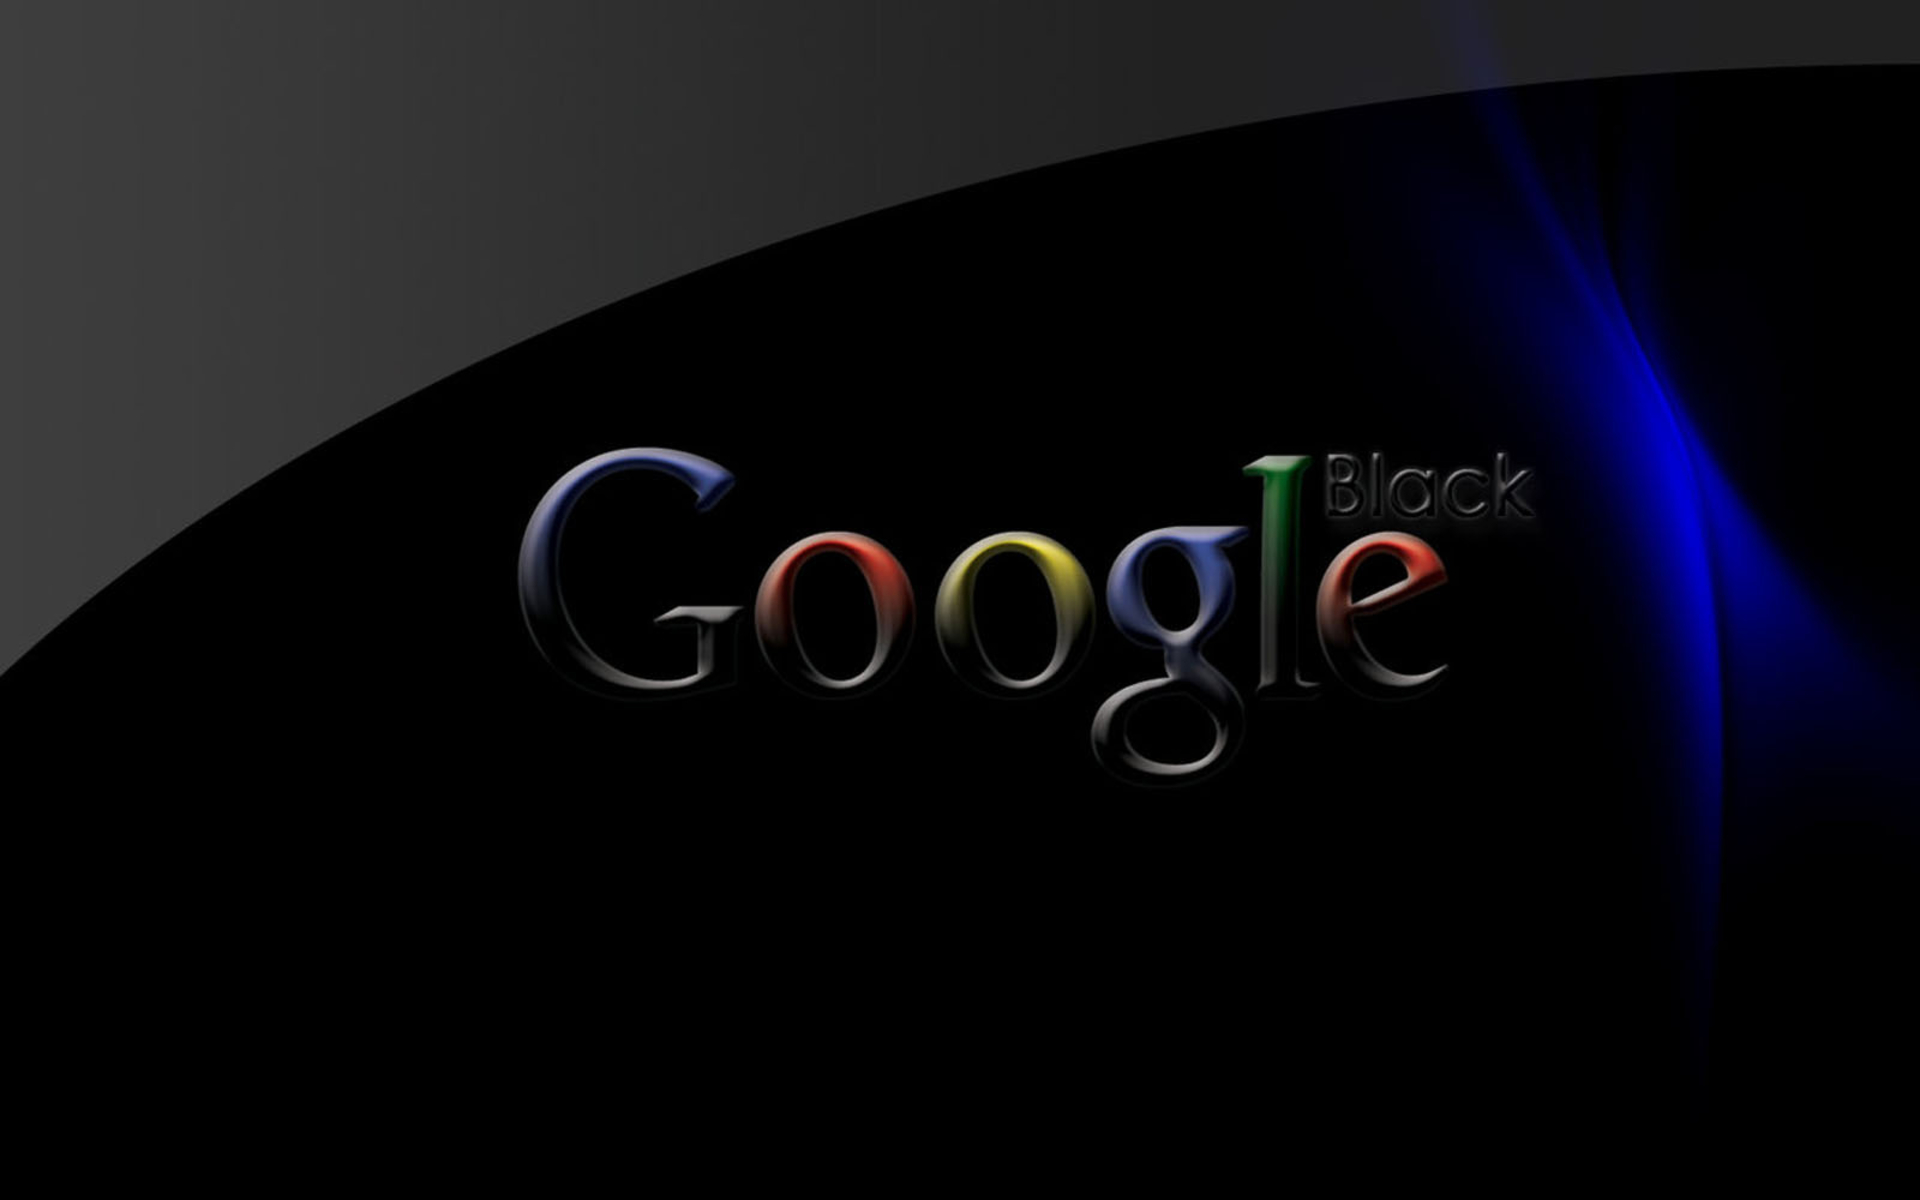 Google HD Wallpaper In Px Resolutions Isaac Merle